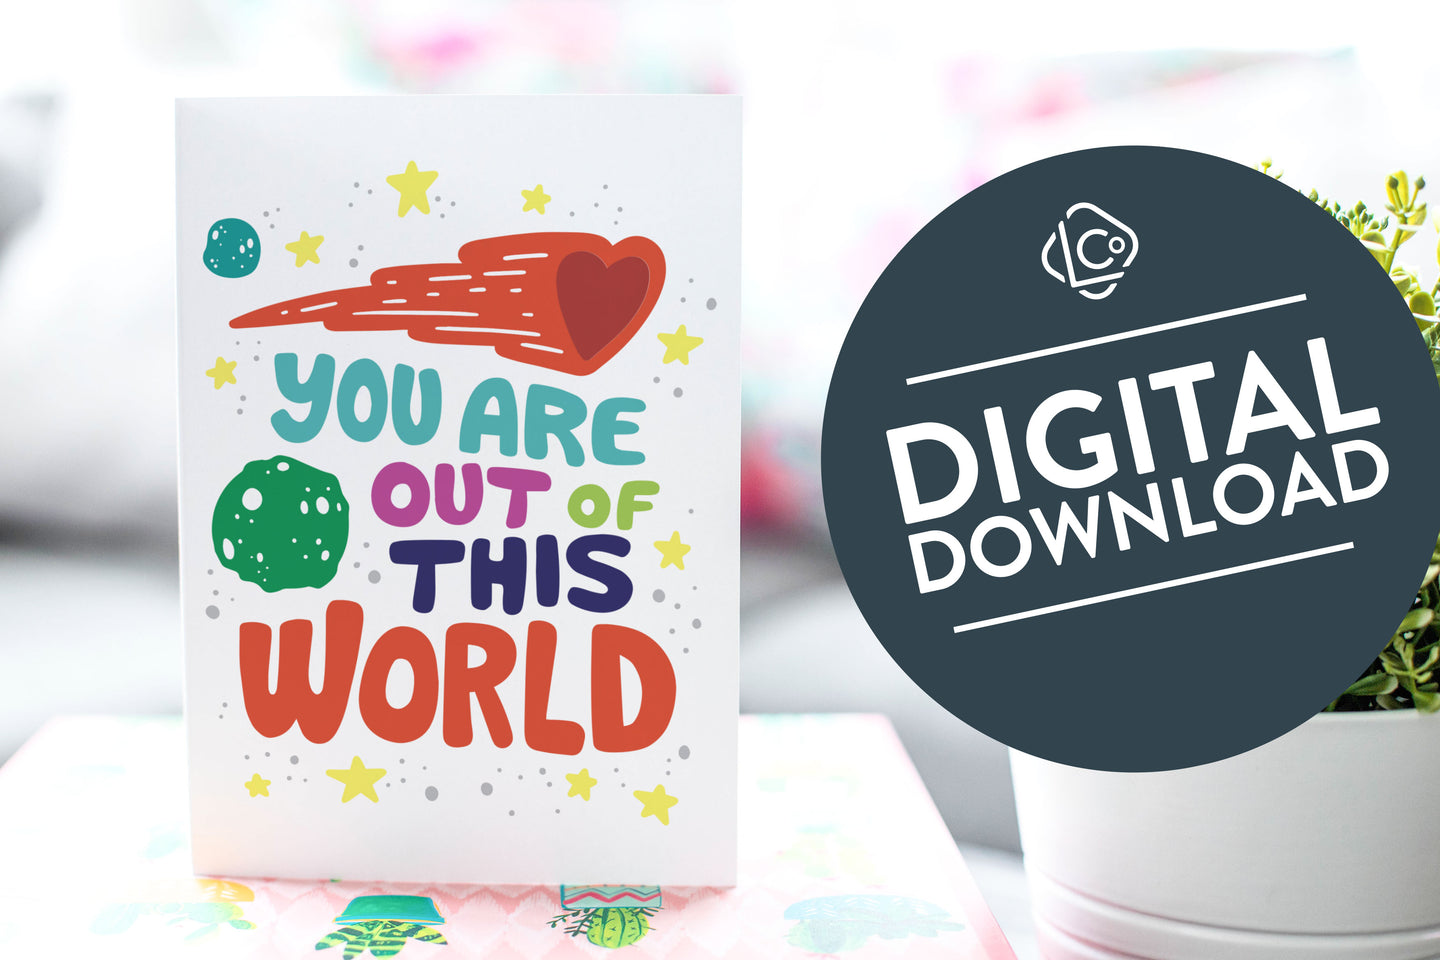 A greeting card is on a table top with a gift in pink wrapping paper. Next to the gift is a white plant pot with a green plant. The card features the words “You are out of this world” with space themed illustrations.. The words 